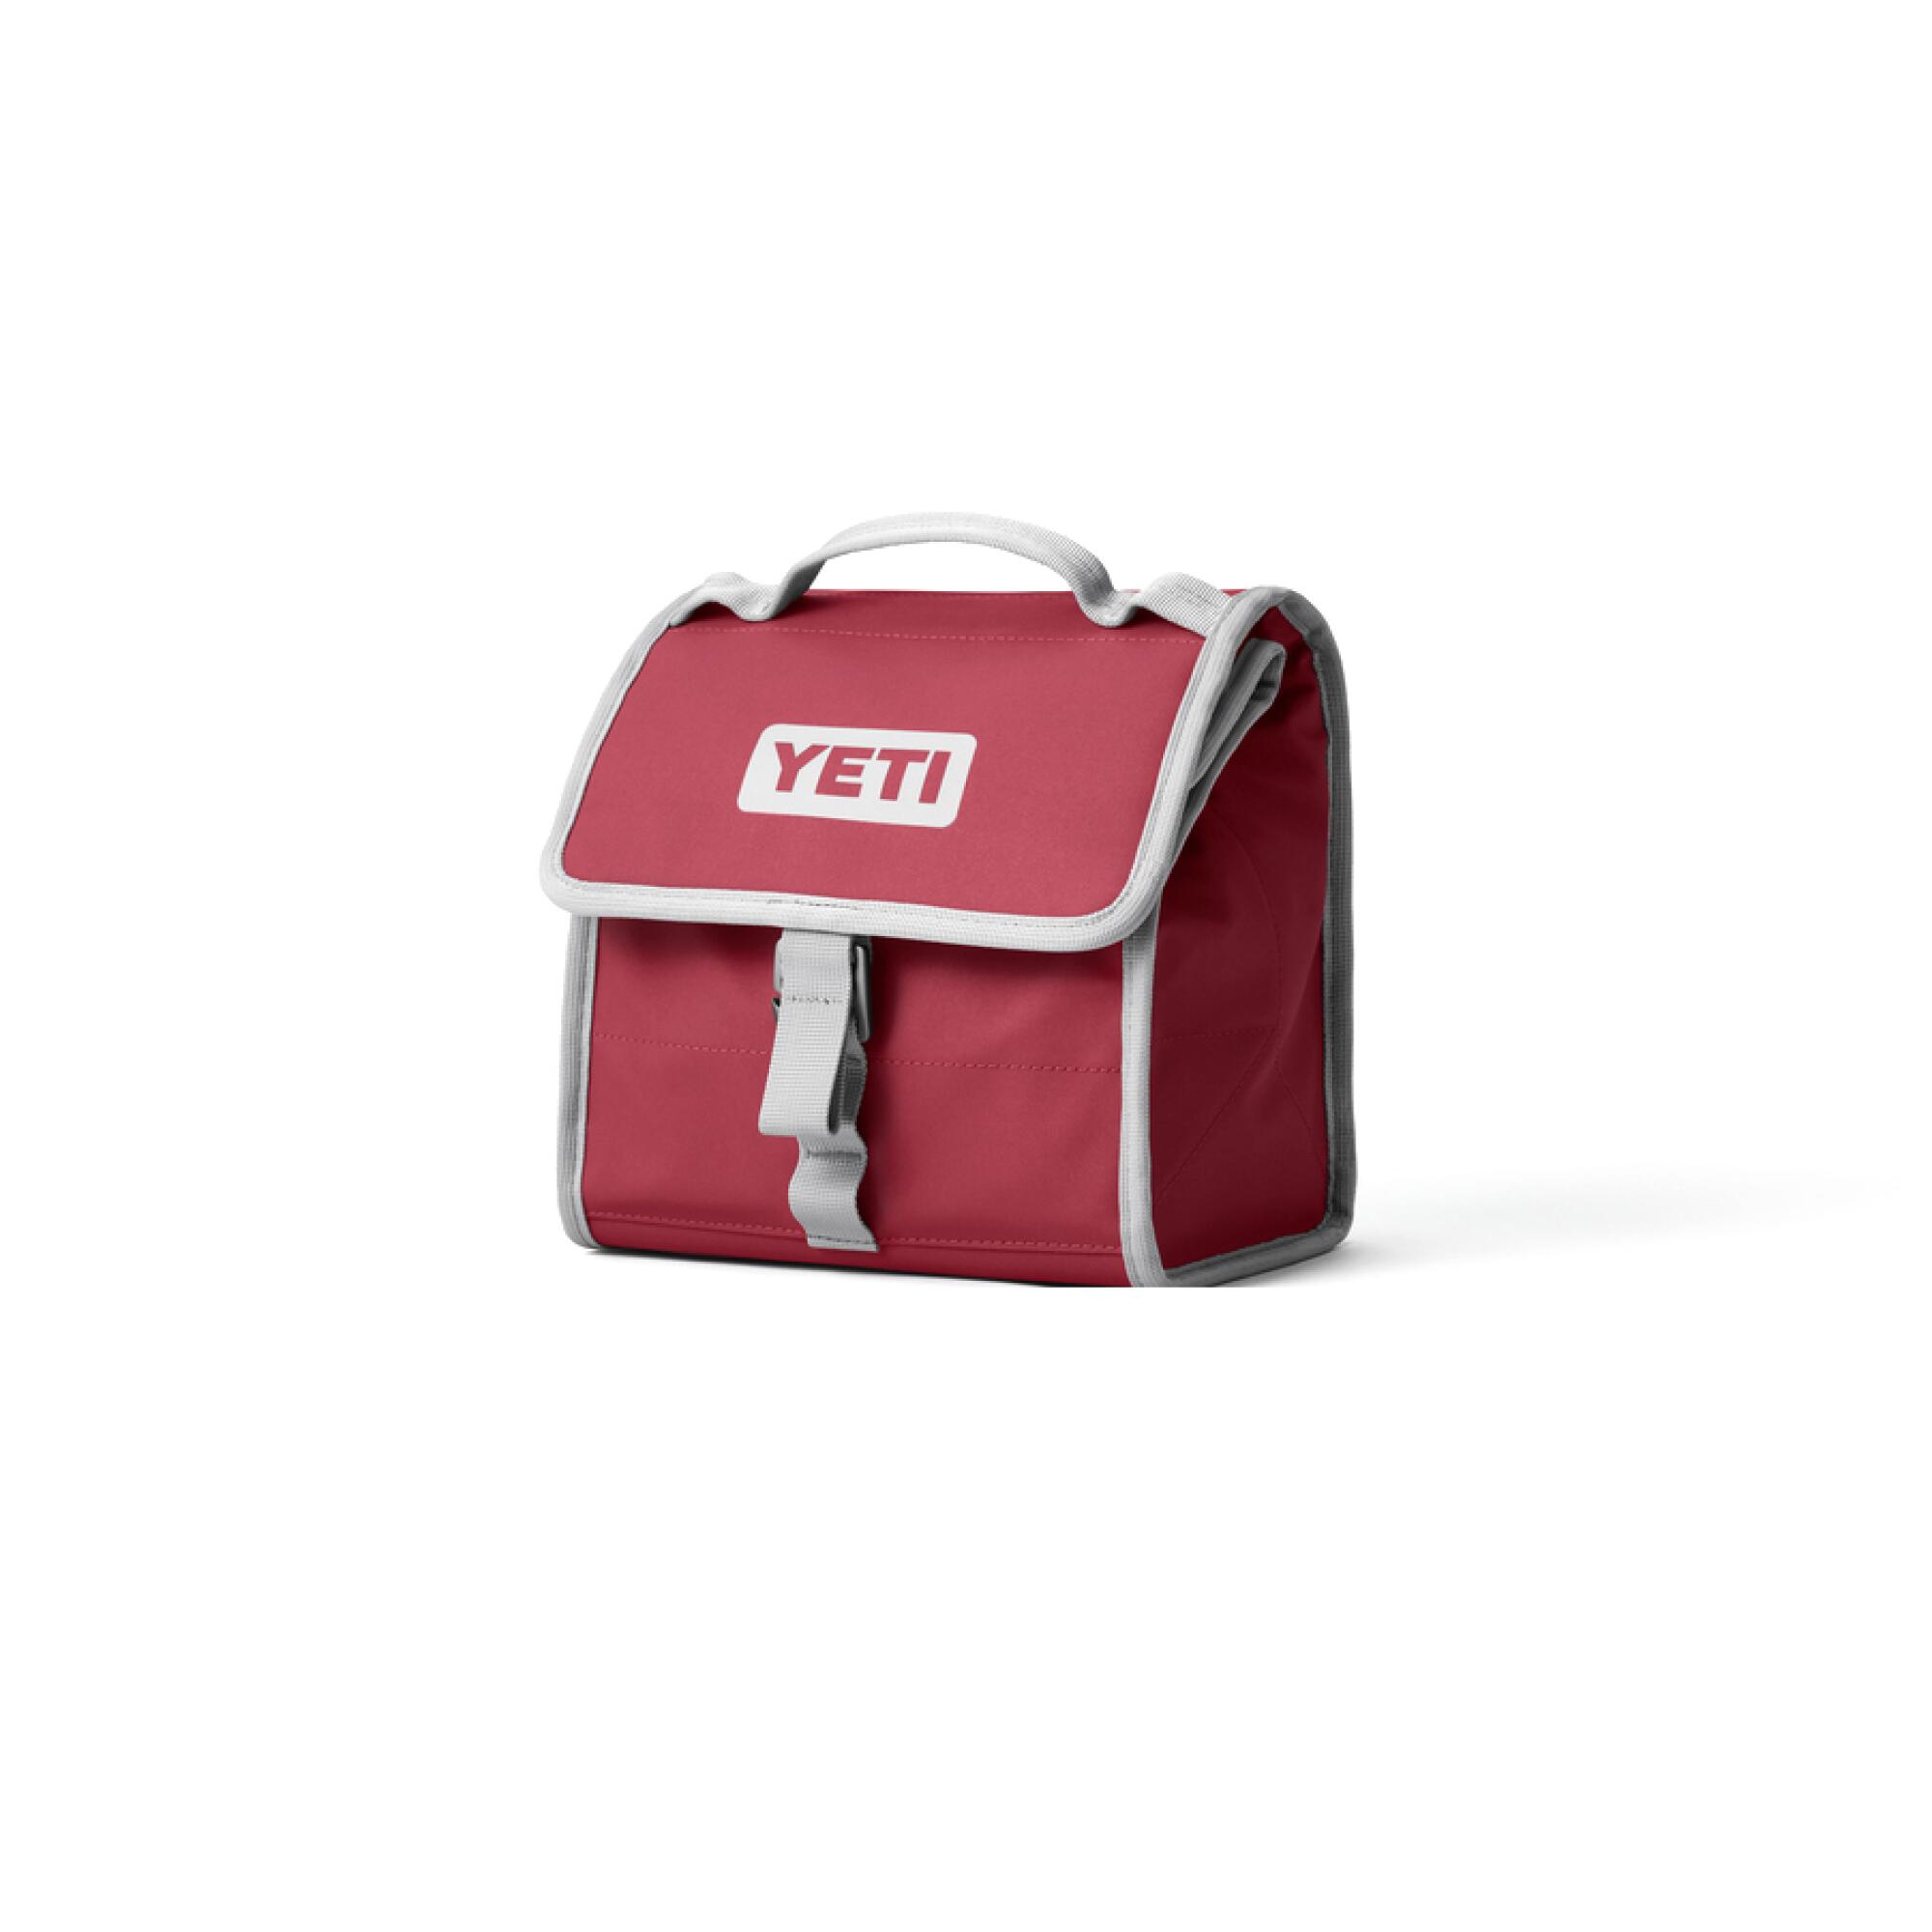 A red lunch box